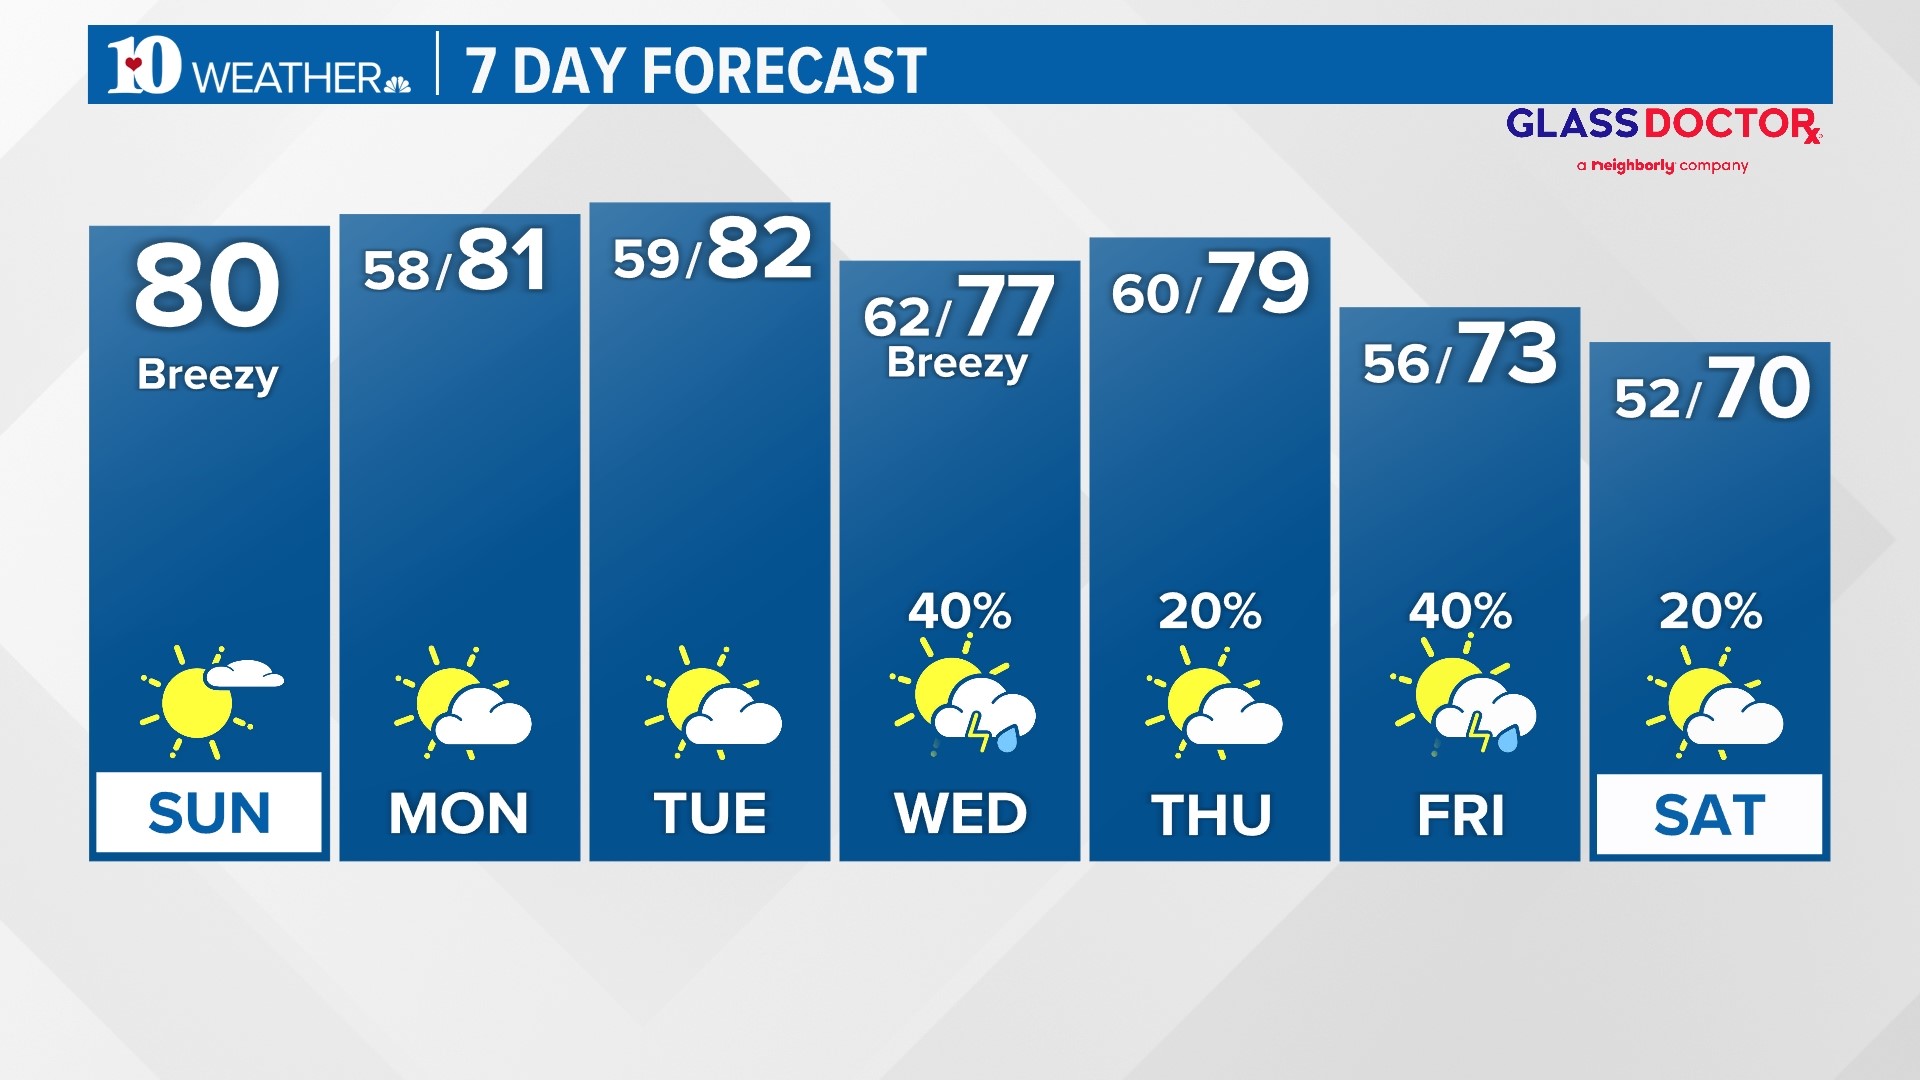 Another beautiful day today! Temps stay warm this week with rain chances returning Wednesday